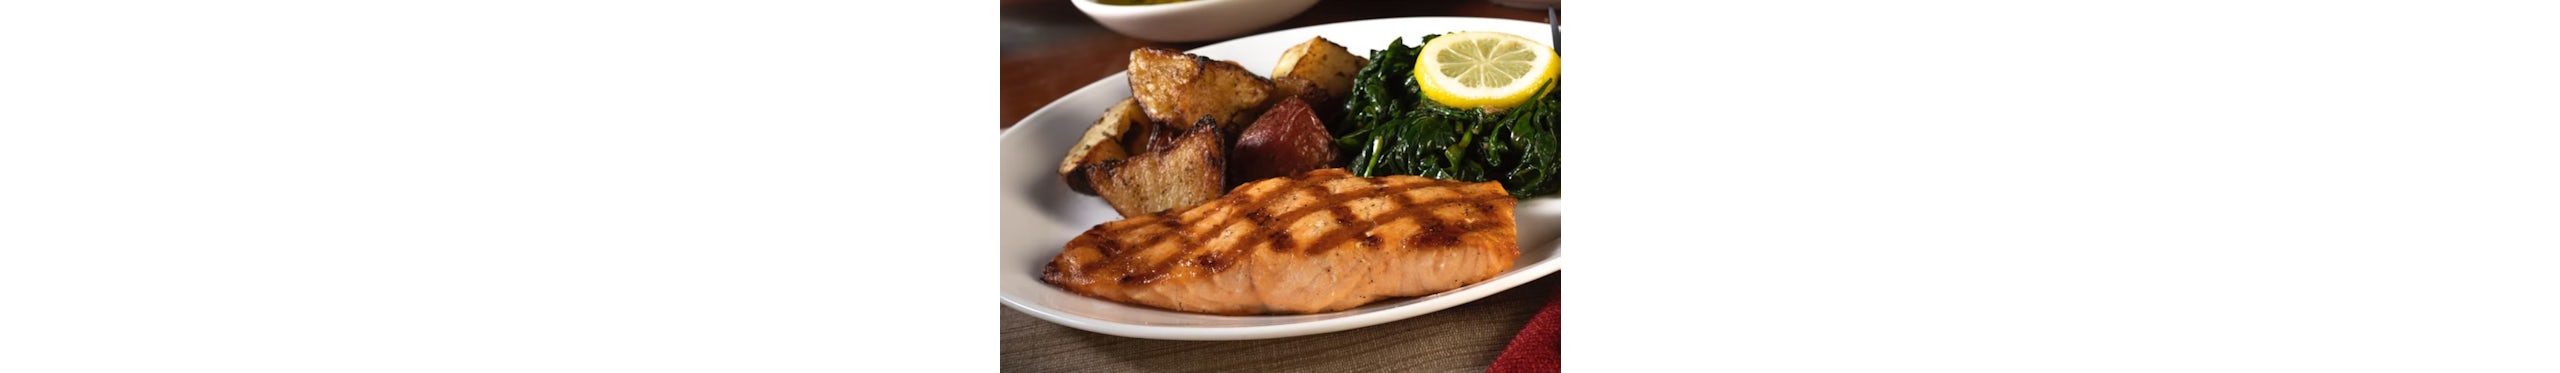 Grilled Salmon*